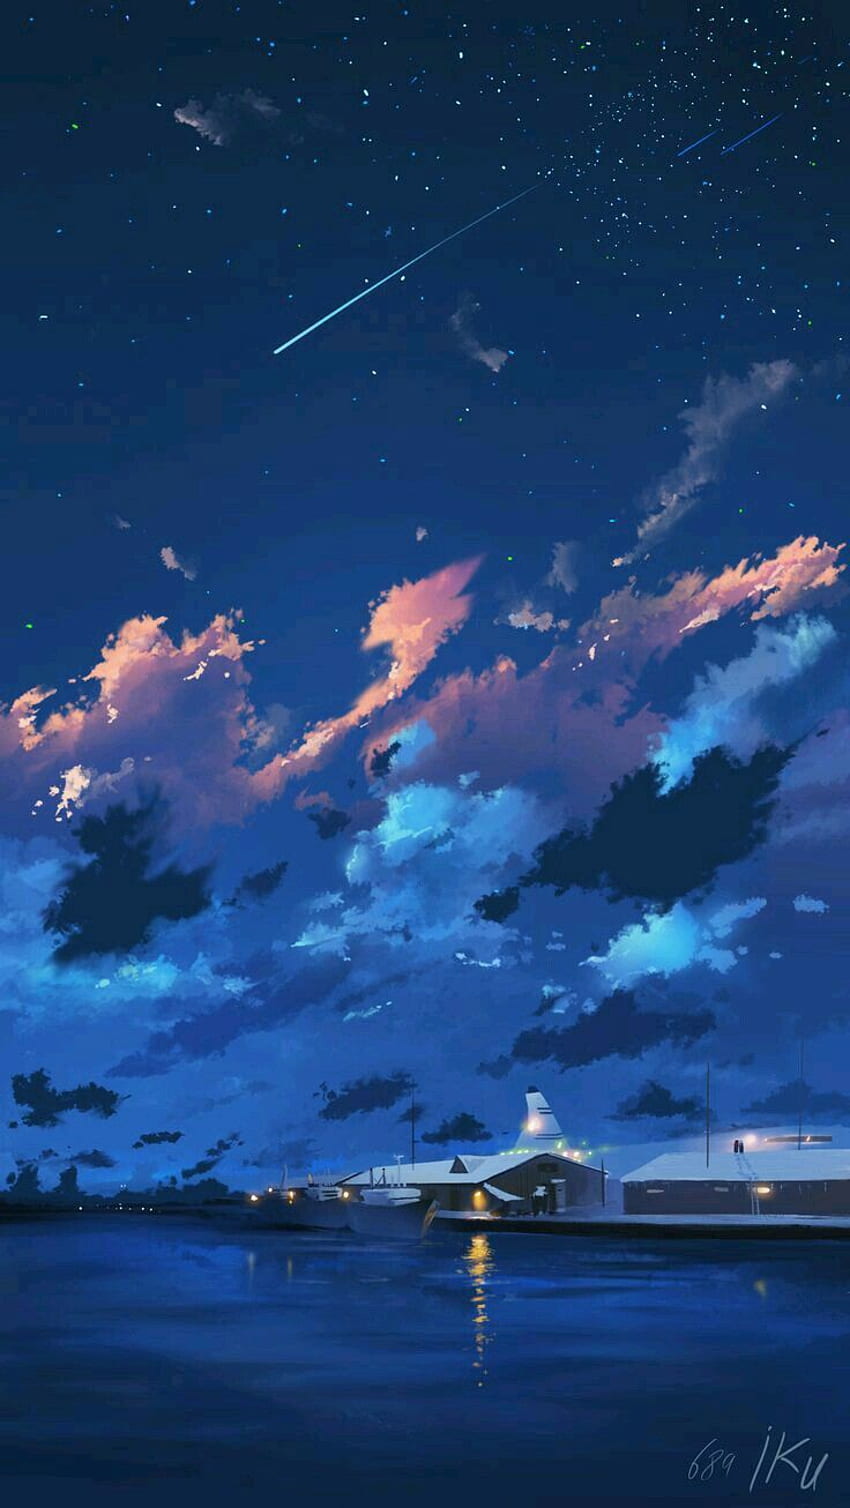 Anime Night IPhone Wallpaper HD  IPhone Wallpapers  iPhone Wallpapers